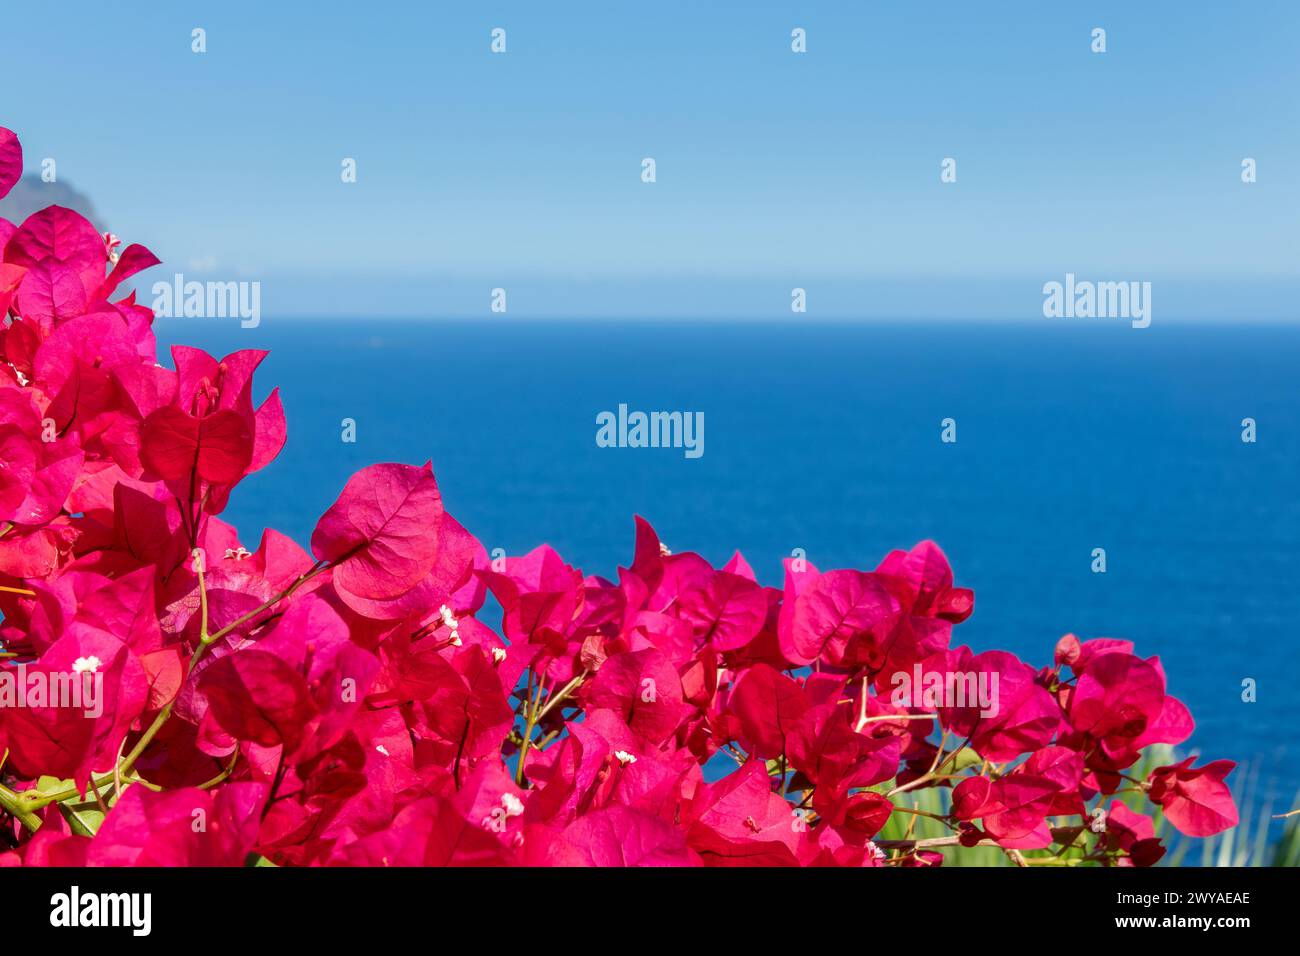 Bougainvillea flowers and ocean background with copyspace Stock Photo